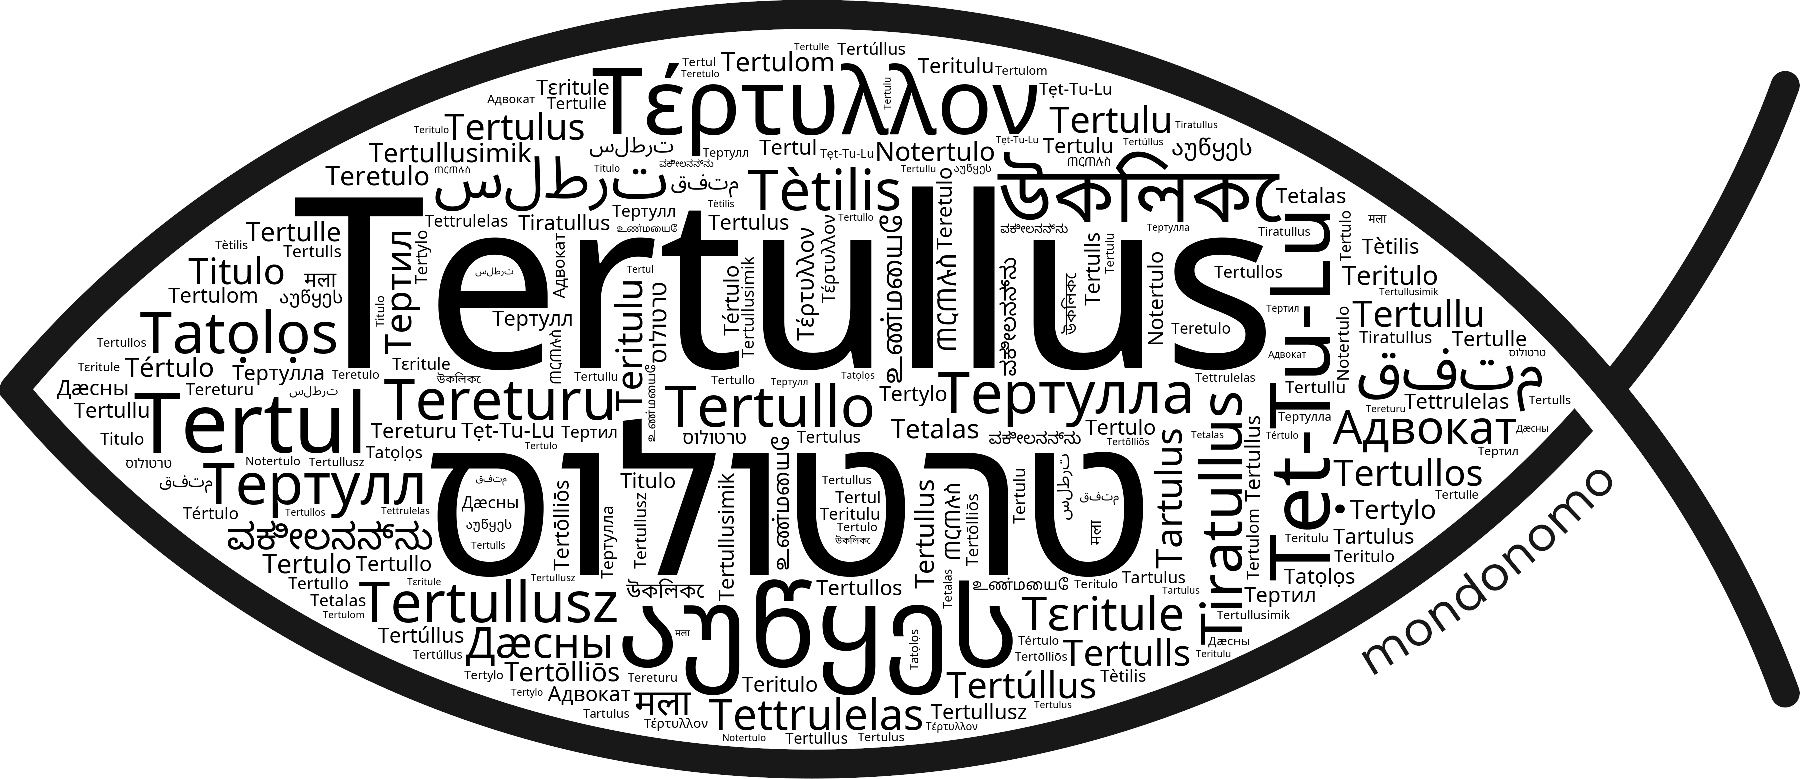 Name Tertullus in the world's Bibles